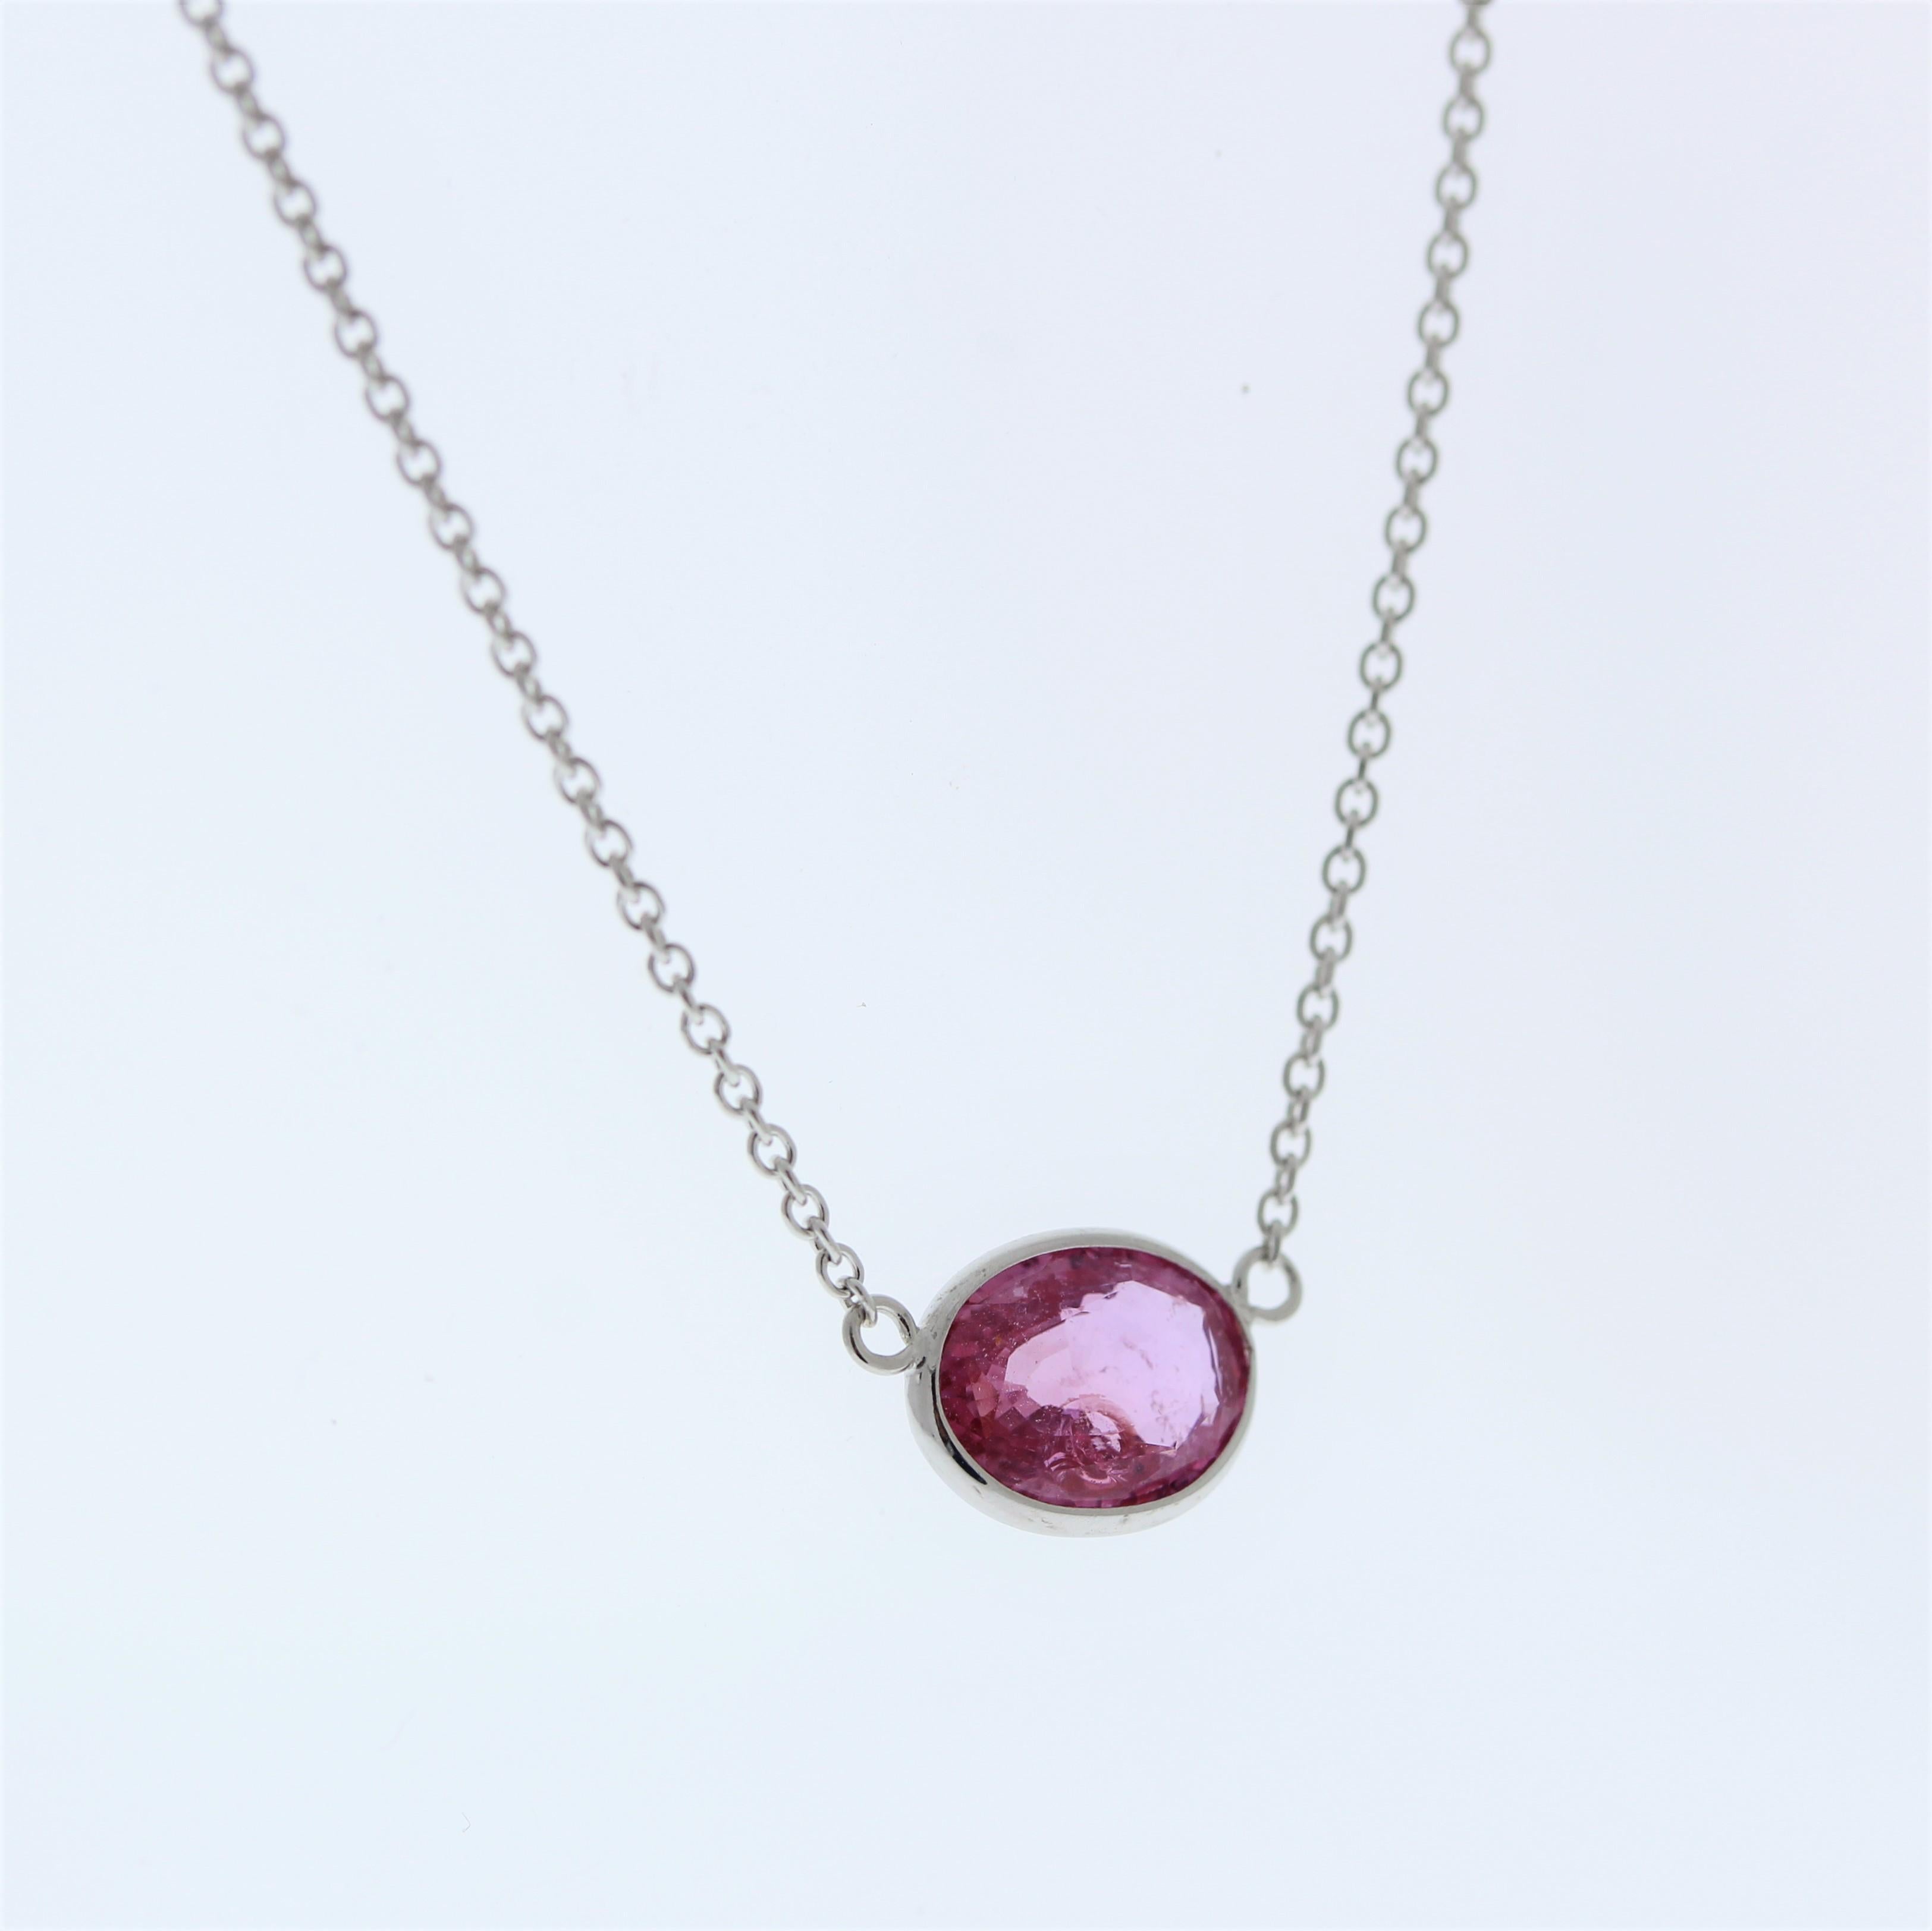 This necklace features a 2.15-carat oval-shaped Padparadscha gemstone with pink hues, set in a 14 karat white gold pendant or setting. The combination of the rare Padparadscha gemstone and the white gold setting suggests a sophisticated and